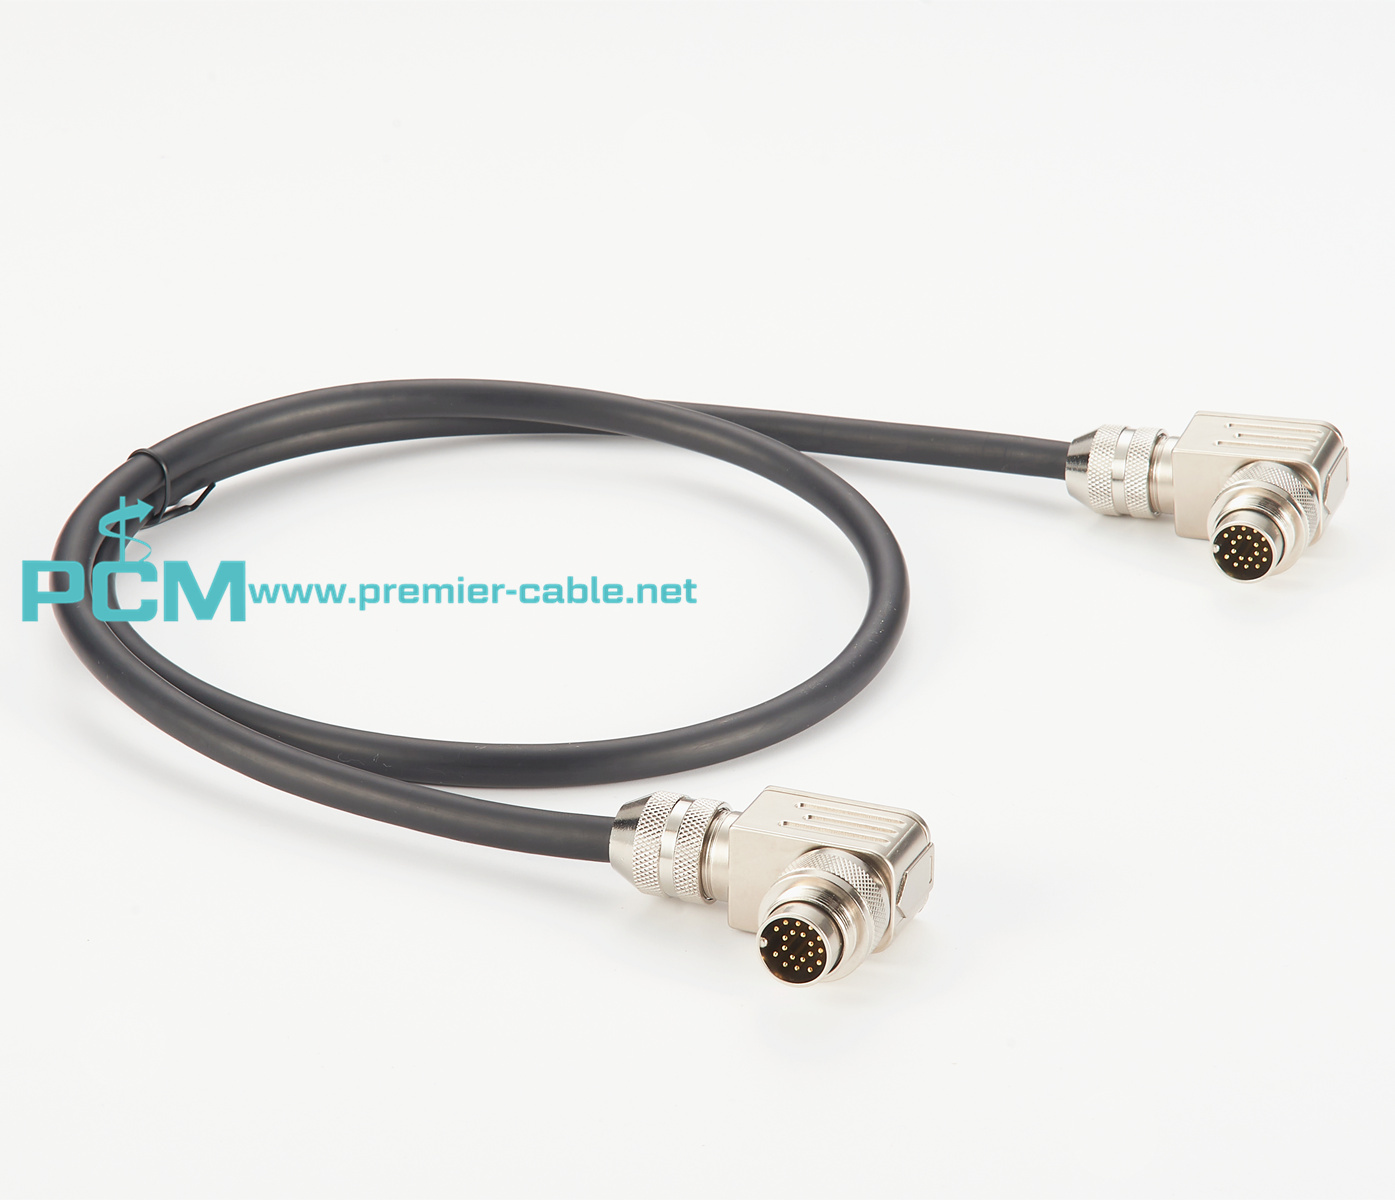 M16 19 Pin Cable 